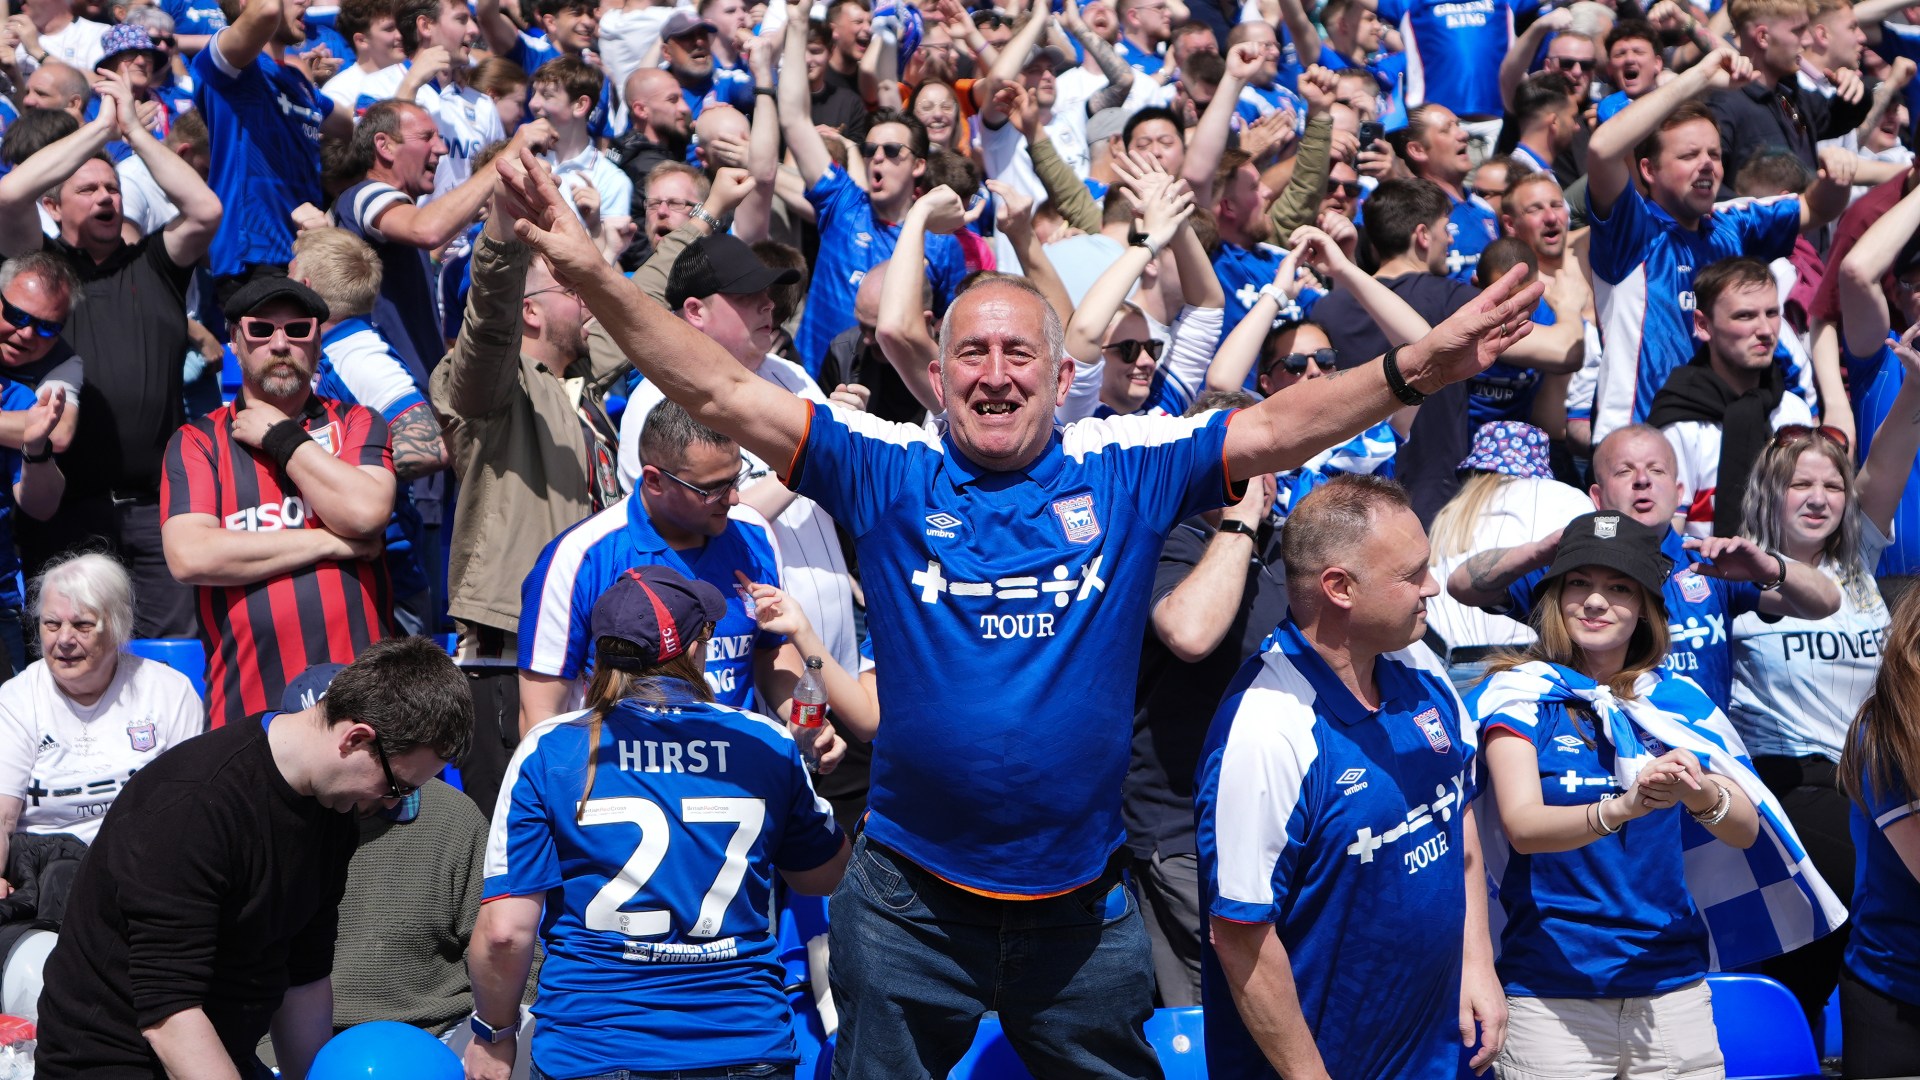 Ipswich Triumphantly Returns to Premier League After 21 Years